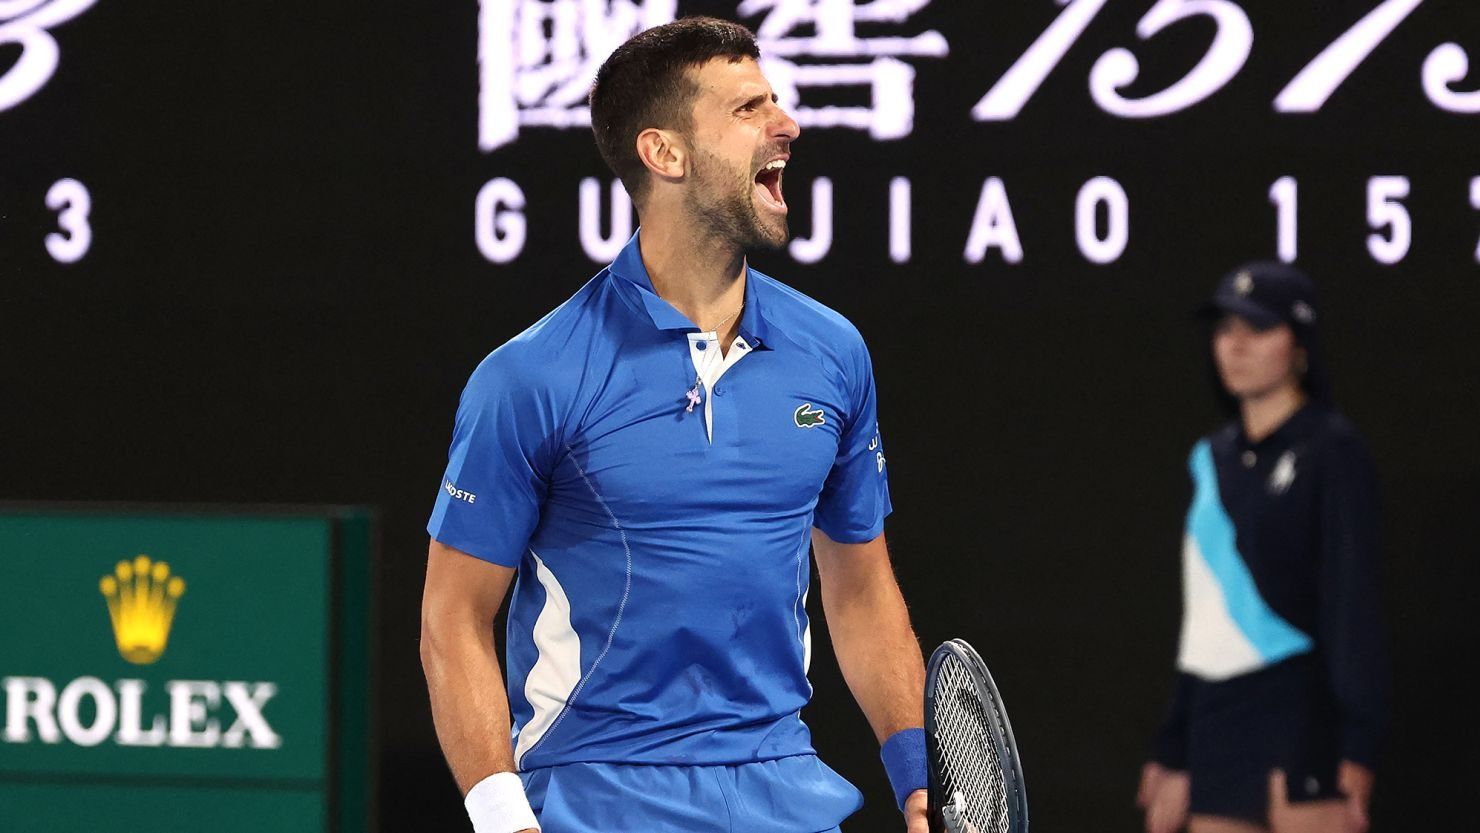 Djokovic: I Haven't Been Playing My Best, I'm Still Trying To Find My Form